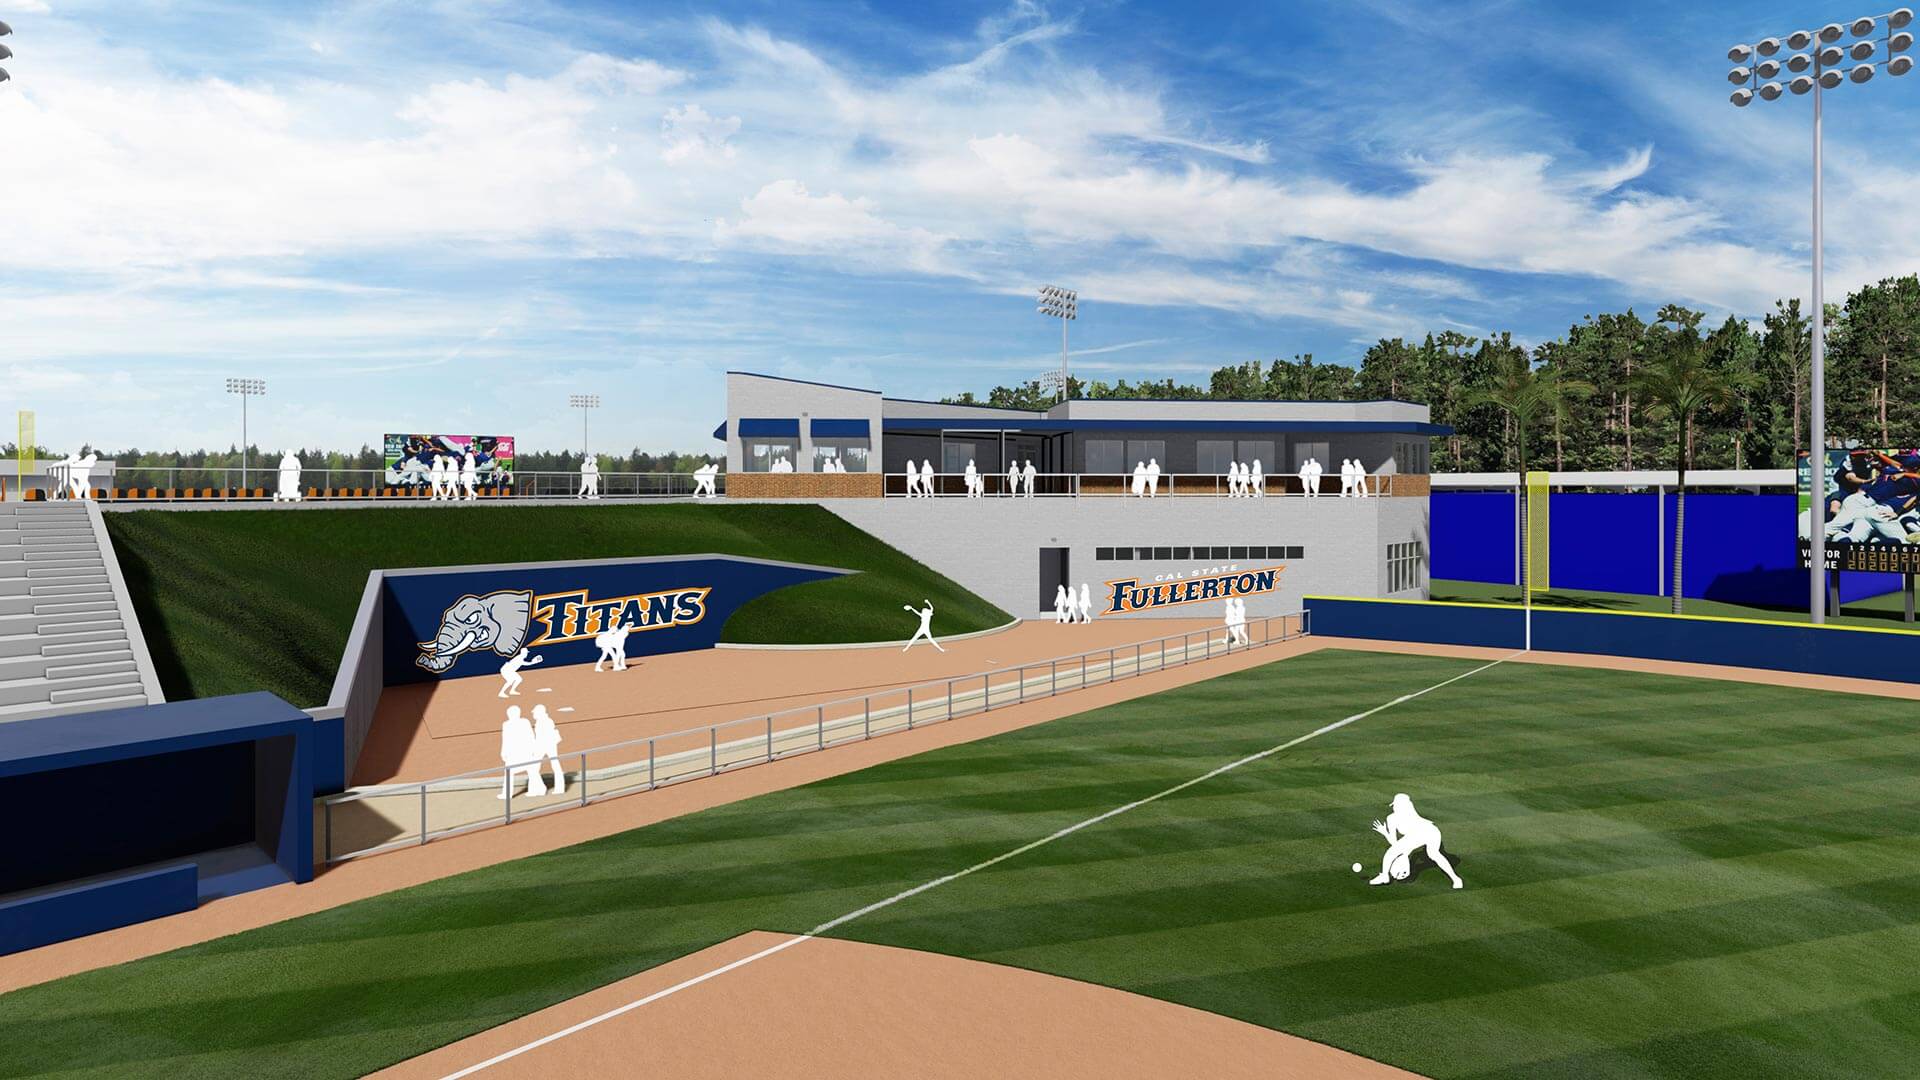 renovated softball clubhouse rendering